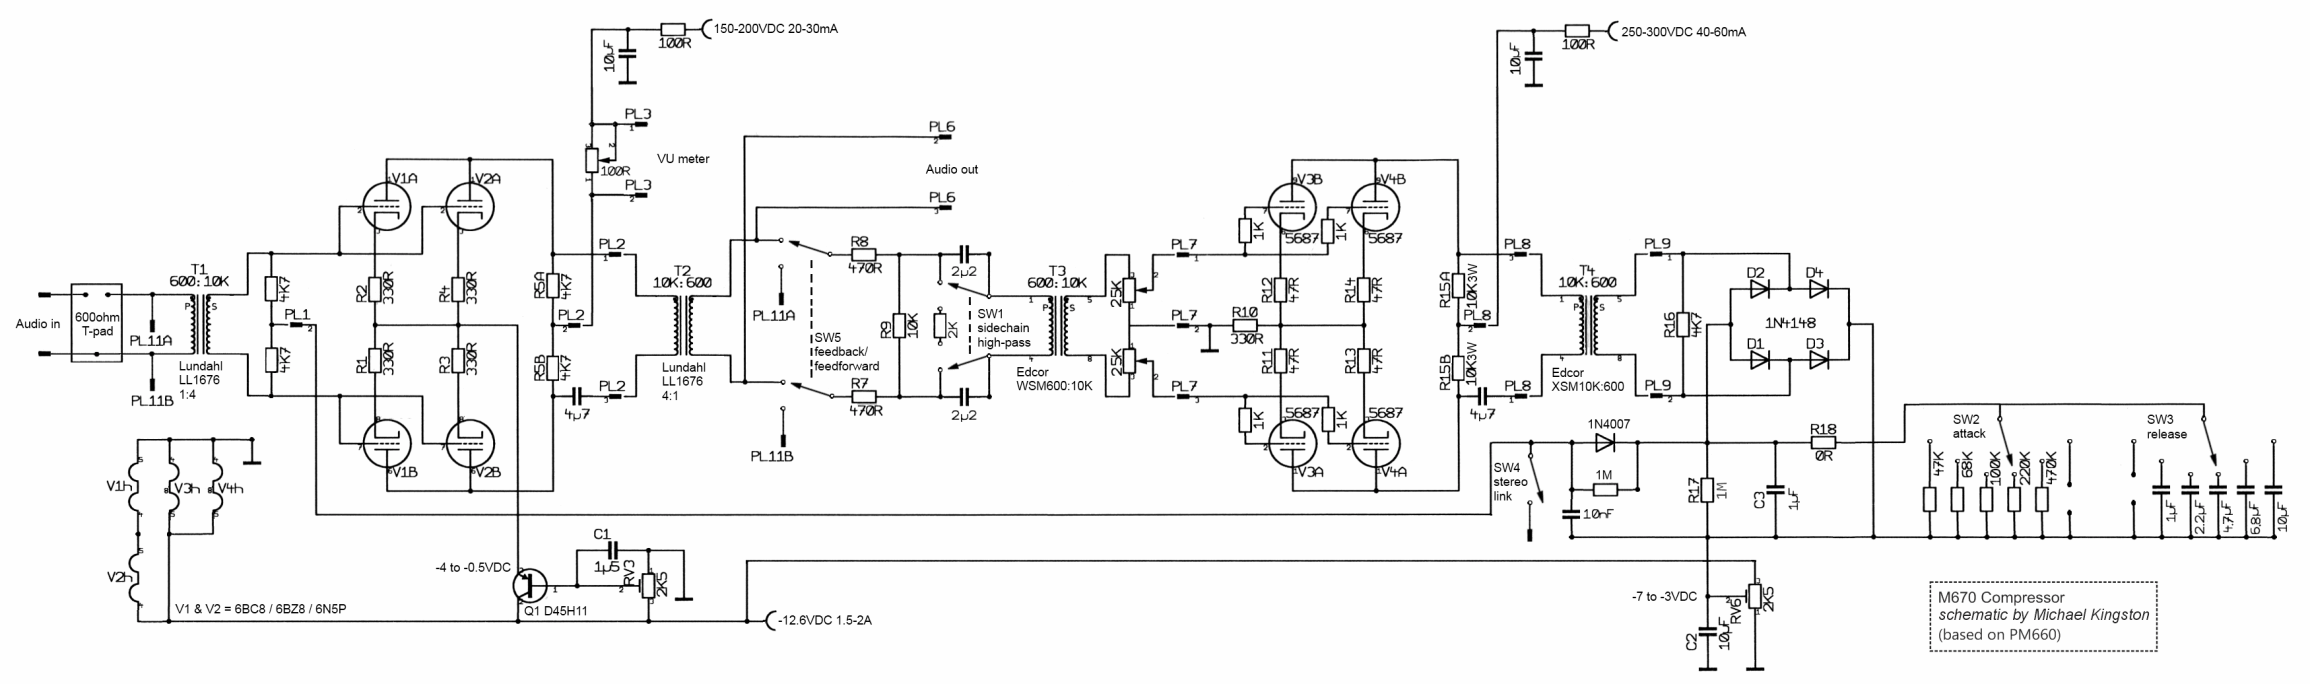 M670-schematic-Kingston-web.png